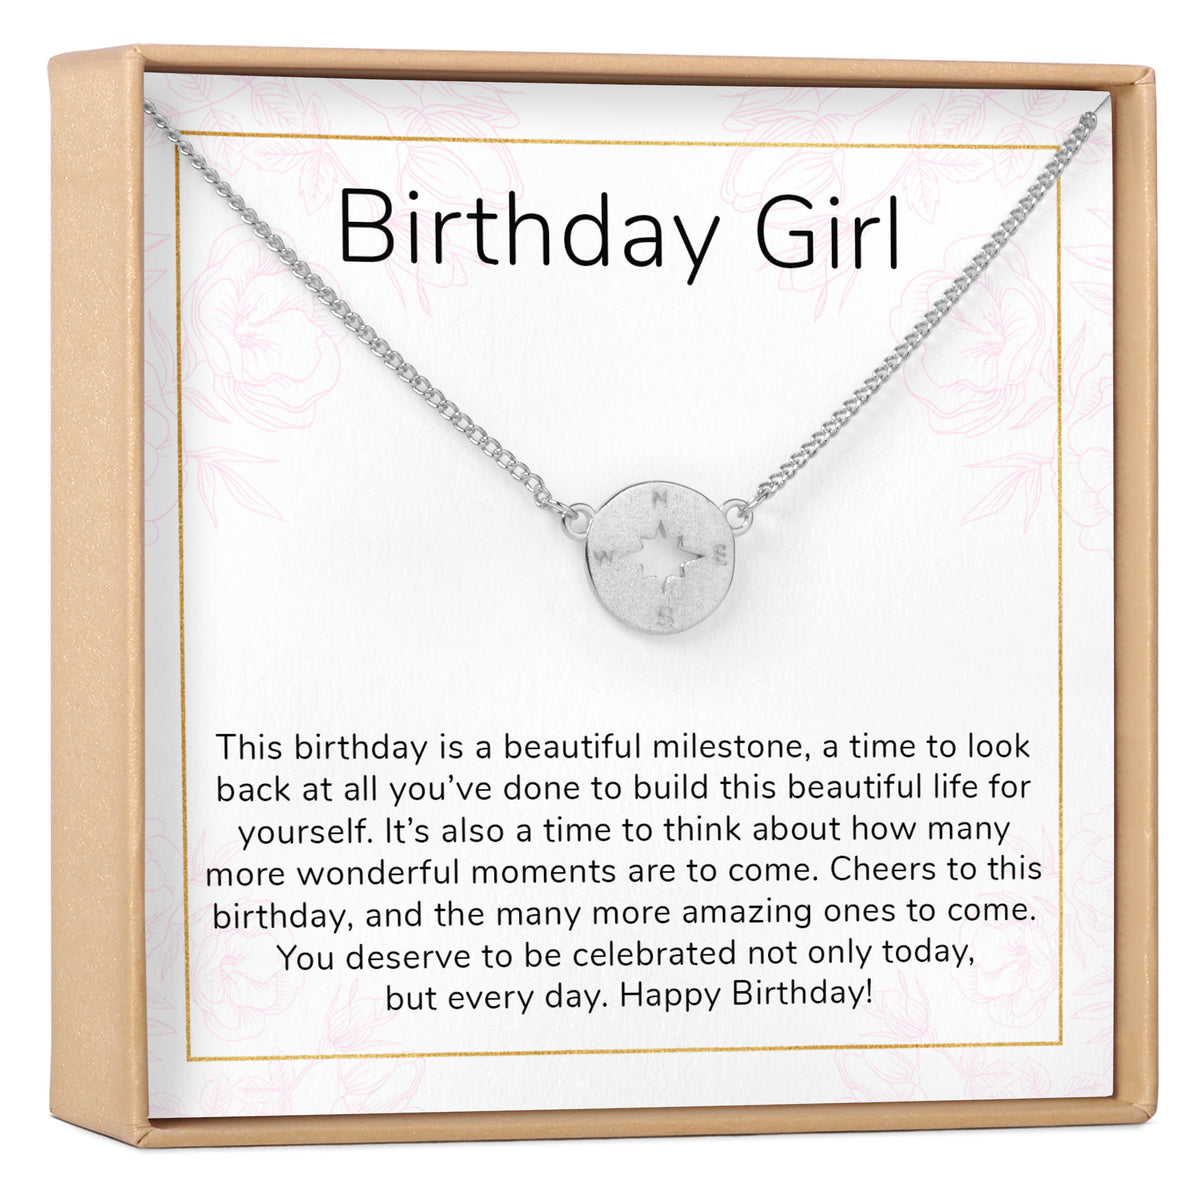 21 Year Old Birthday Wishes Gift Silver Plated Charm Bracelet